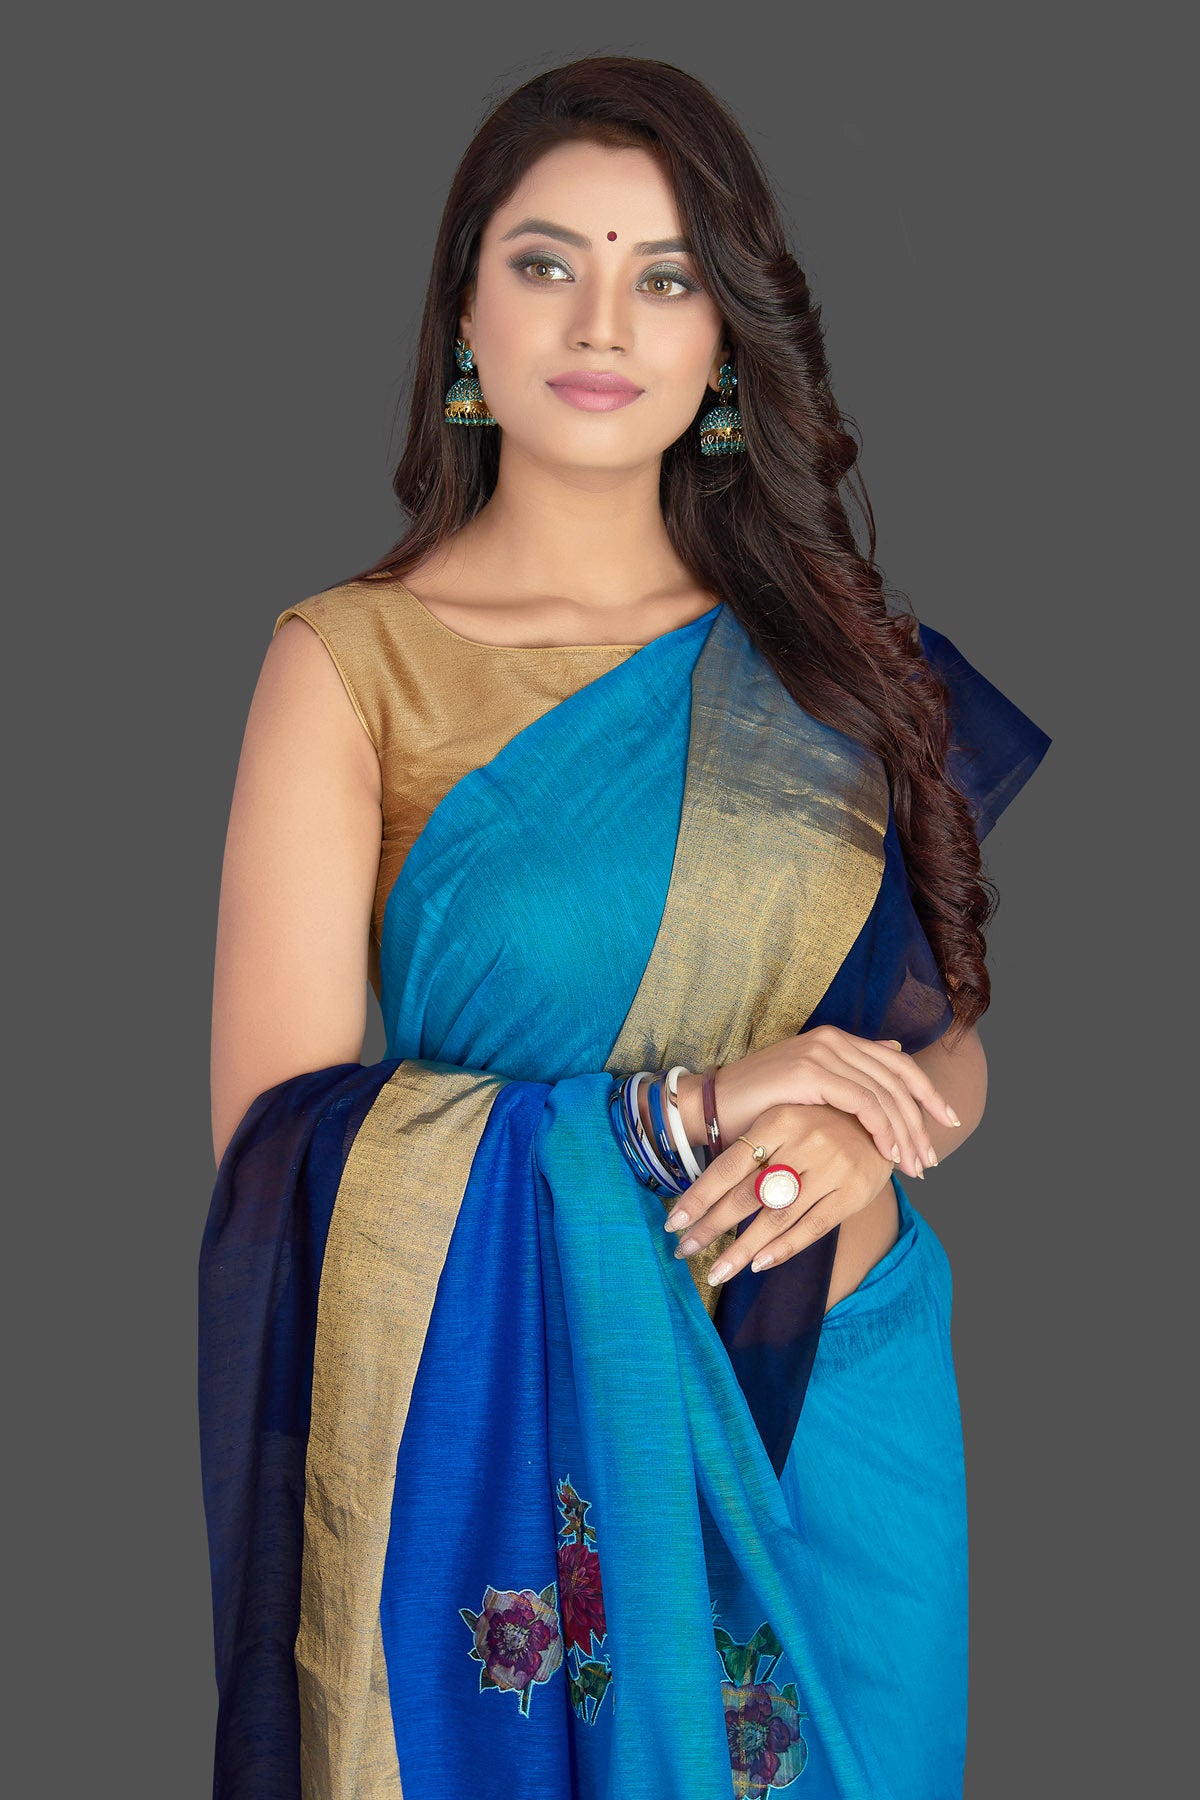 Shop charming blue floral applique linen sari online in USA with powder blue floral saree blouse. Radiate elegance with designer sarees with blouse, linen sarees from Pure Elegance Indian fashion boutique in USA. We bring a especially curated collection of ethnic saris for Indian women in USA under one roof!-closeup